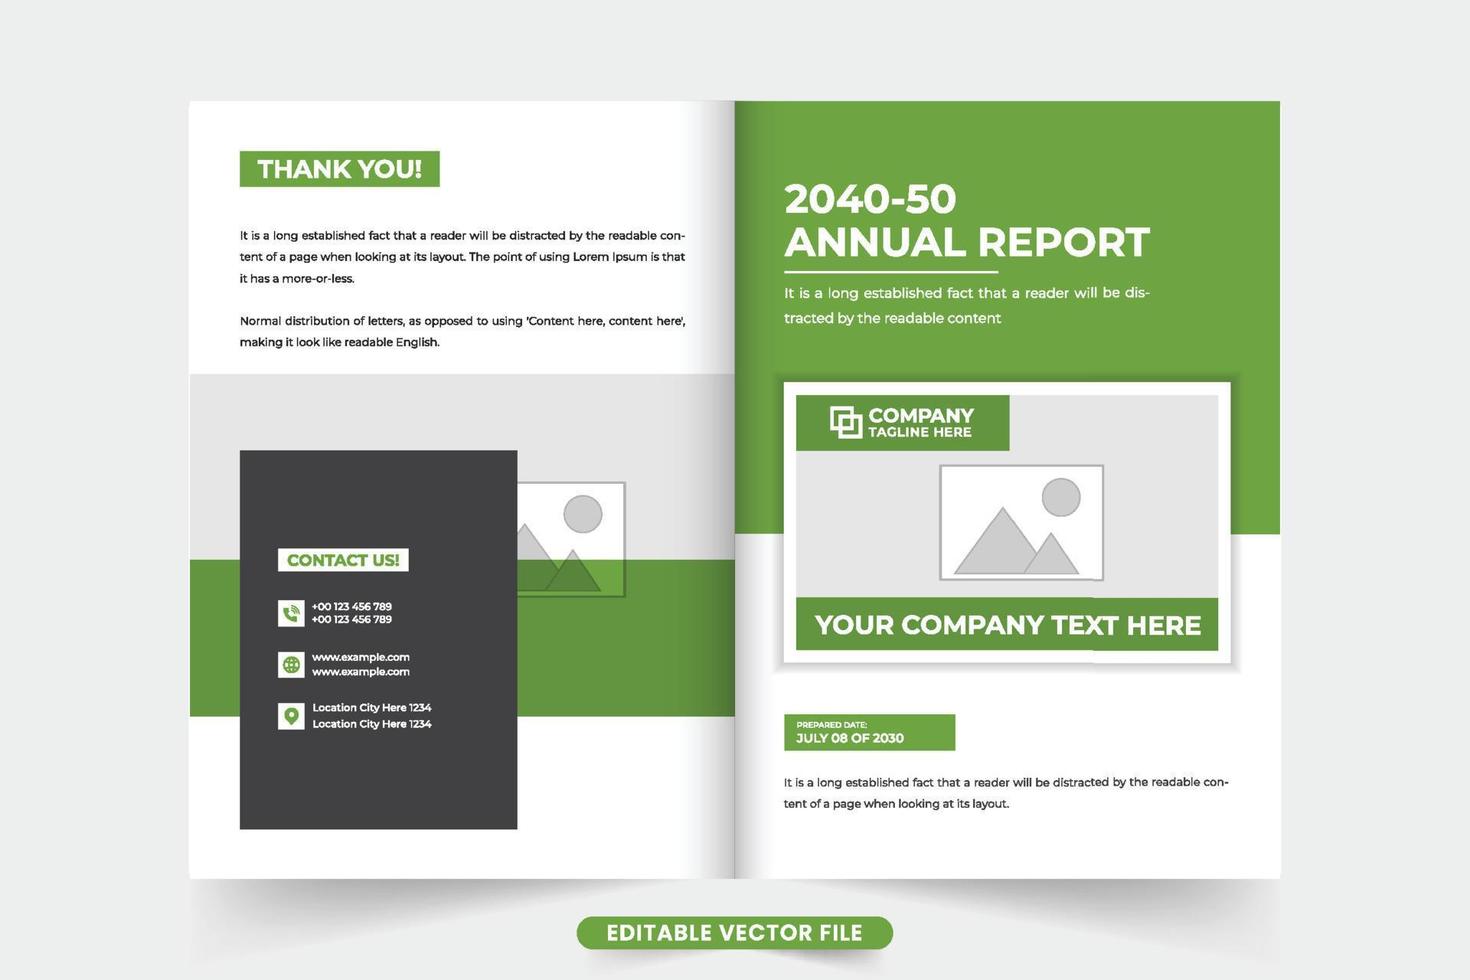 Business annual report and portfolio cover template vector with green and dark colors. Modern business overview and profile cover design with photo placeholders. Corporate magazine and booklet cover.